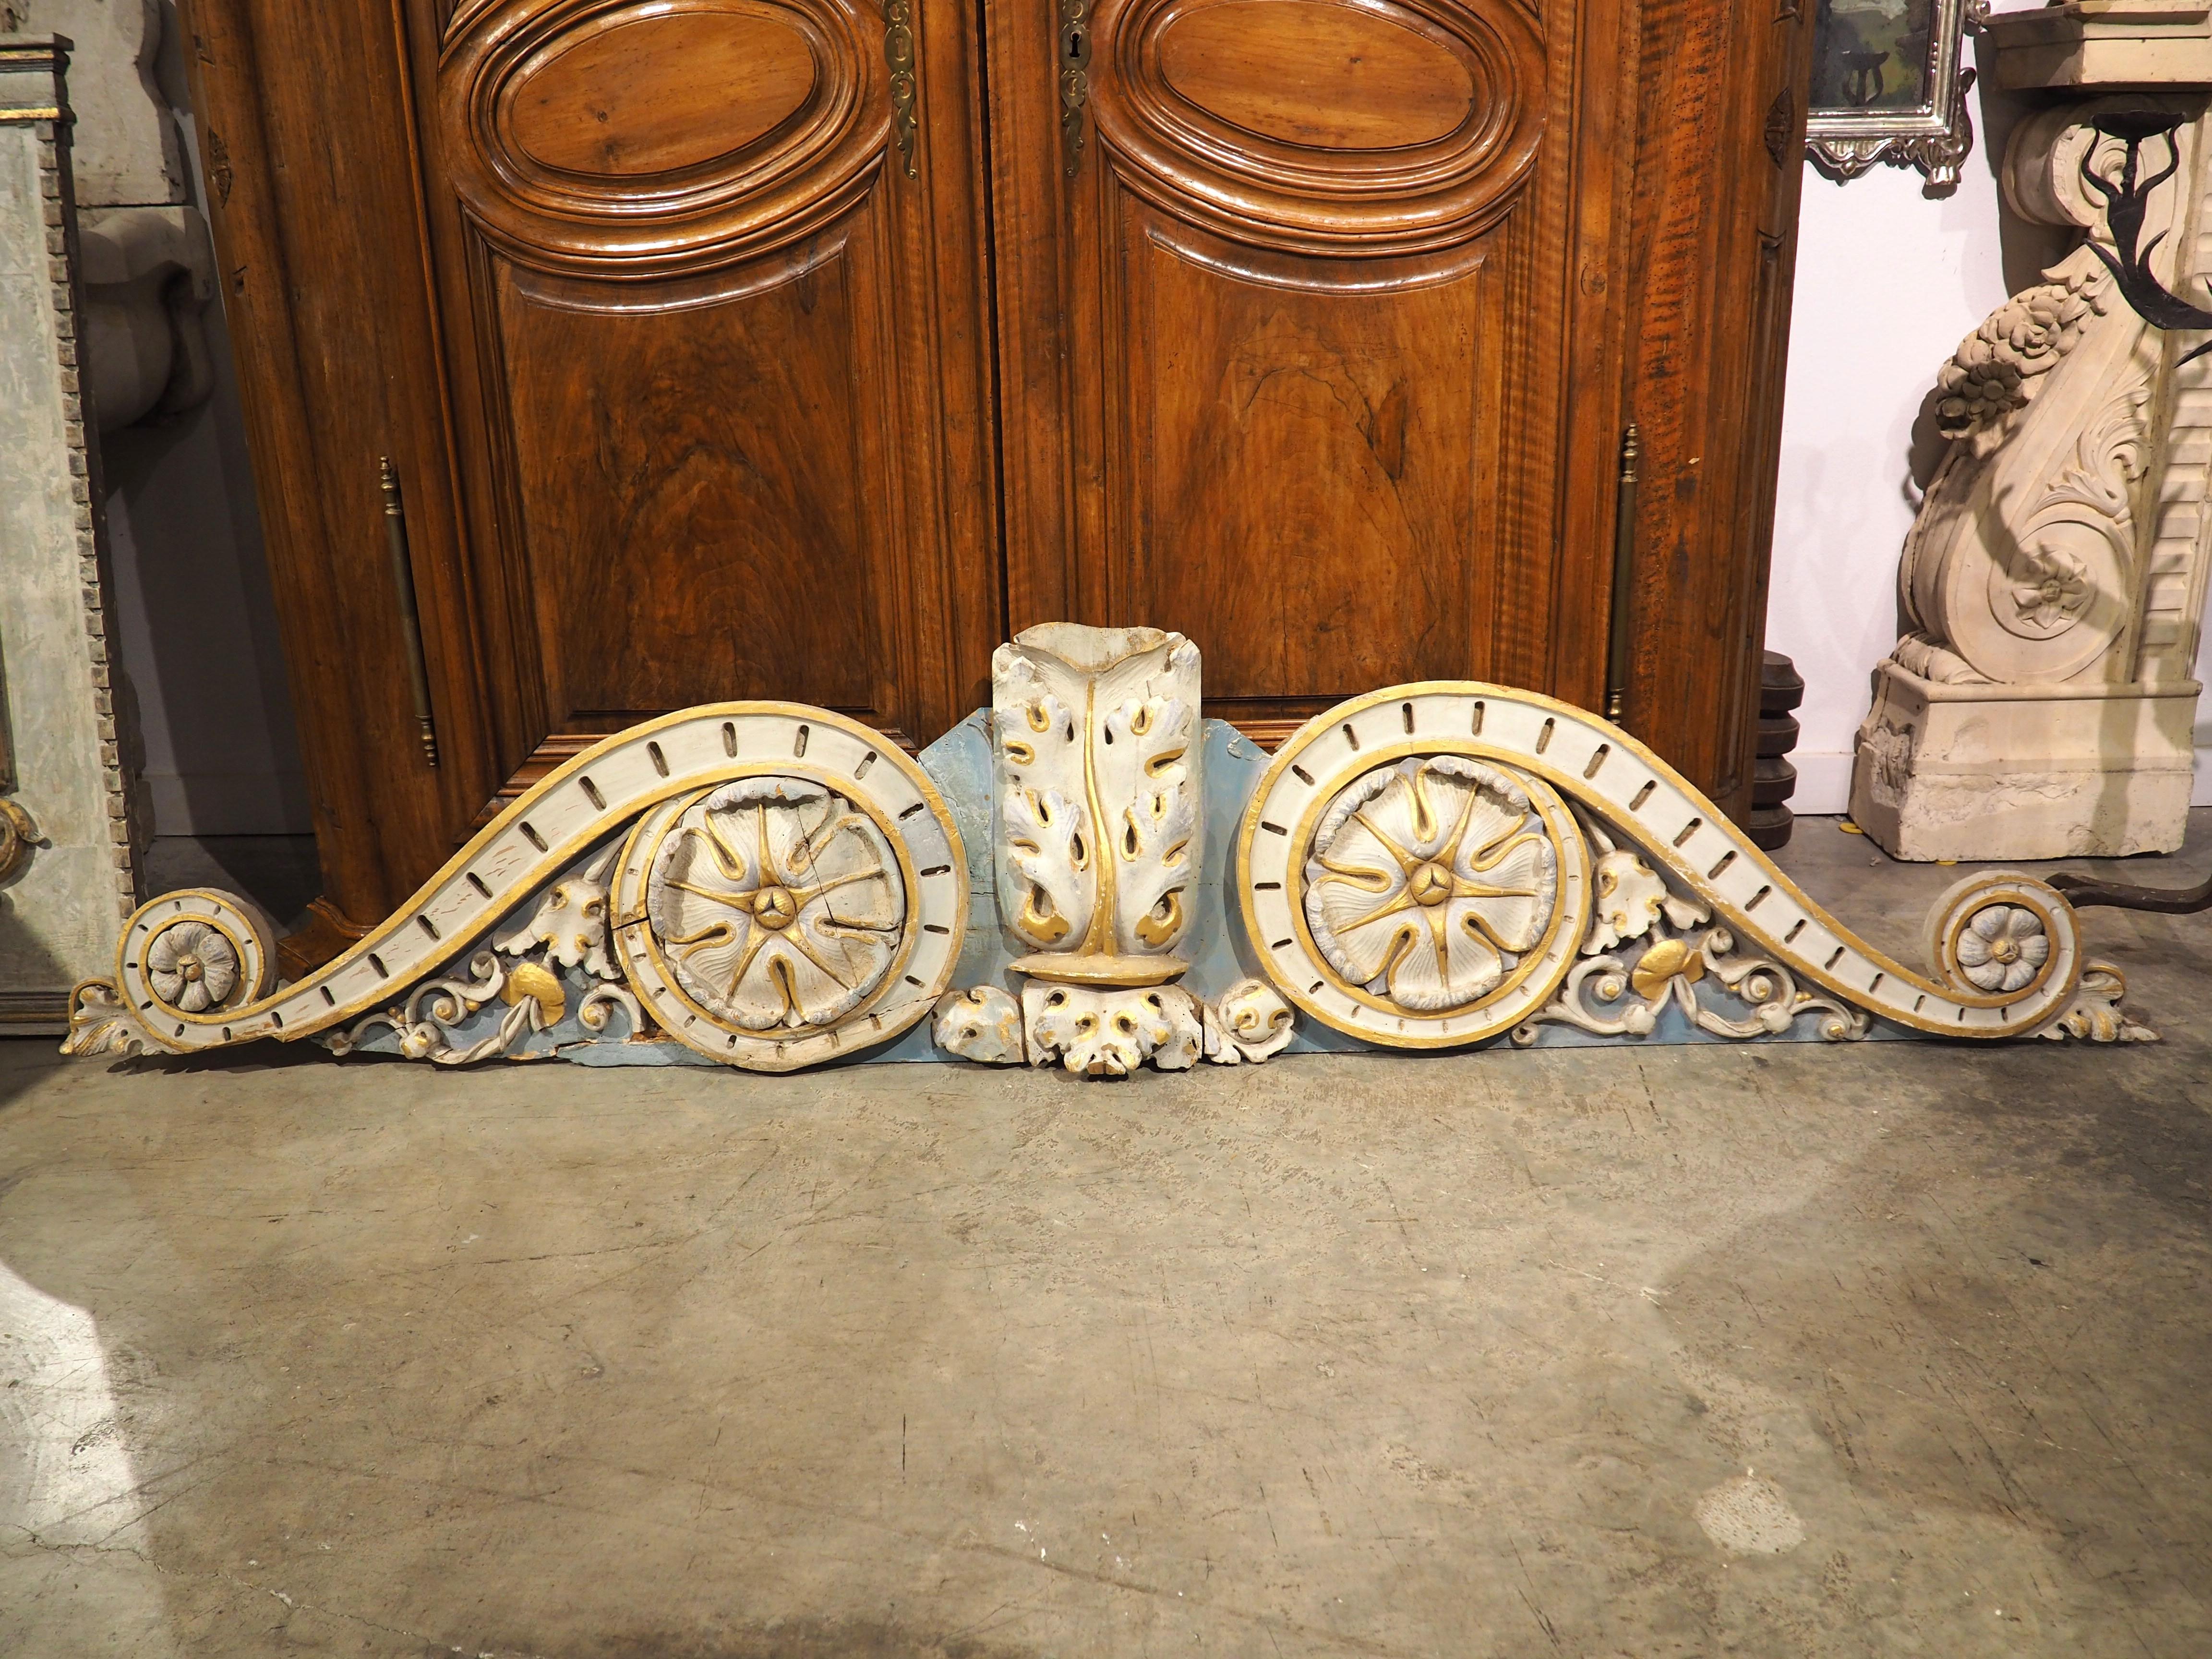 Hand-Carved 18th Century French Carved and Polychrome Overdoor, Length 93 Inches